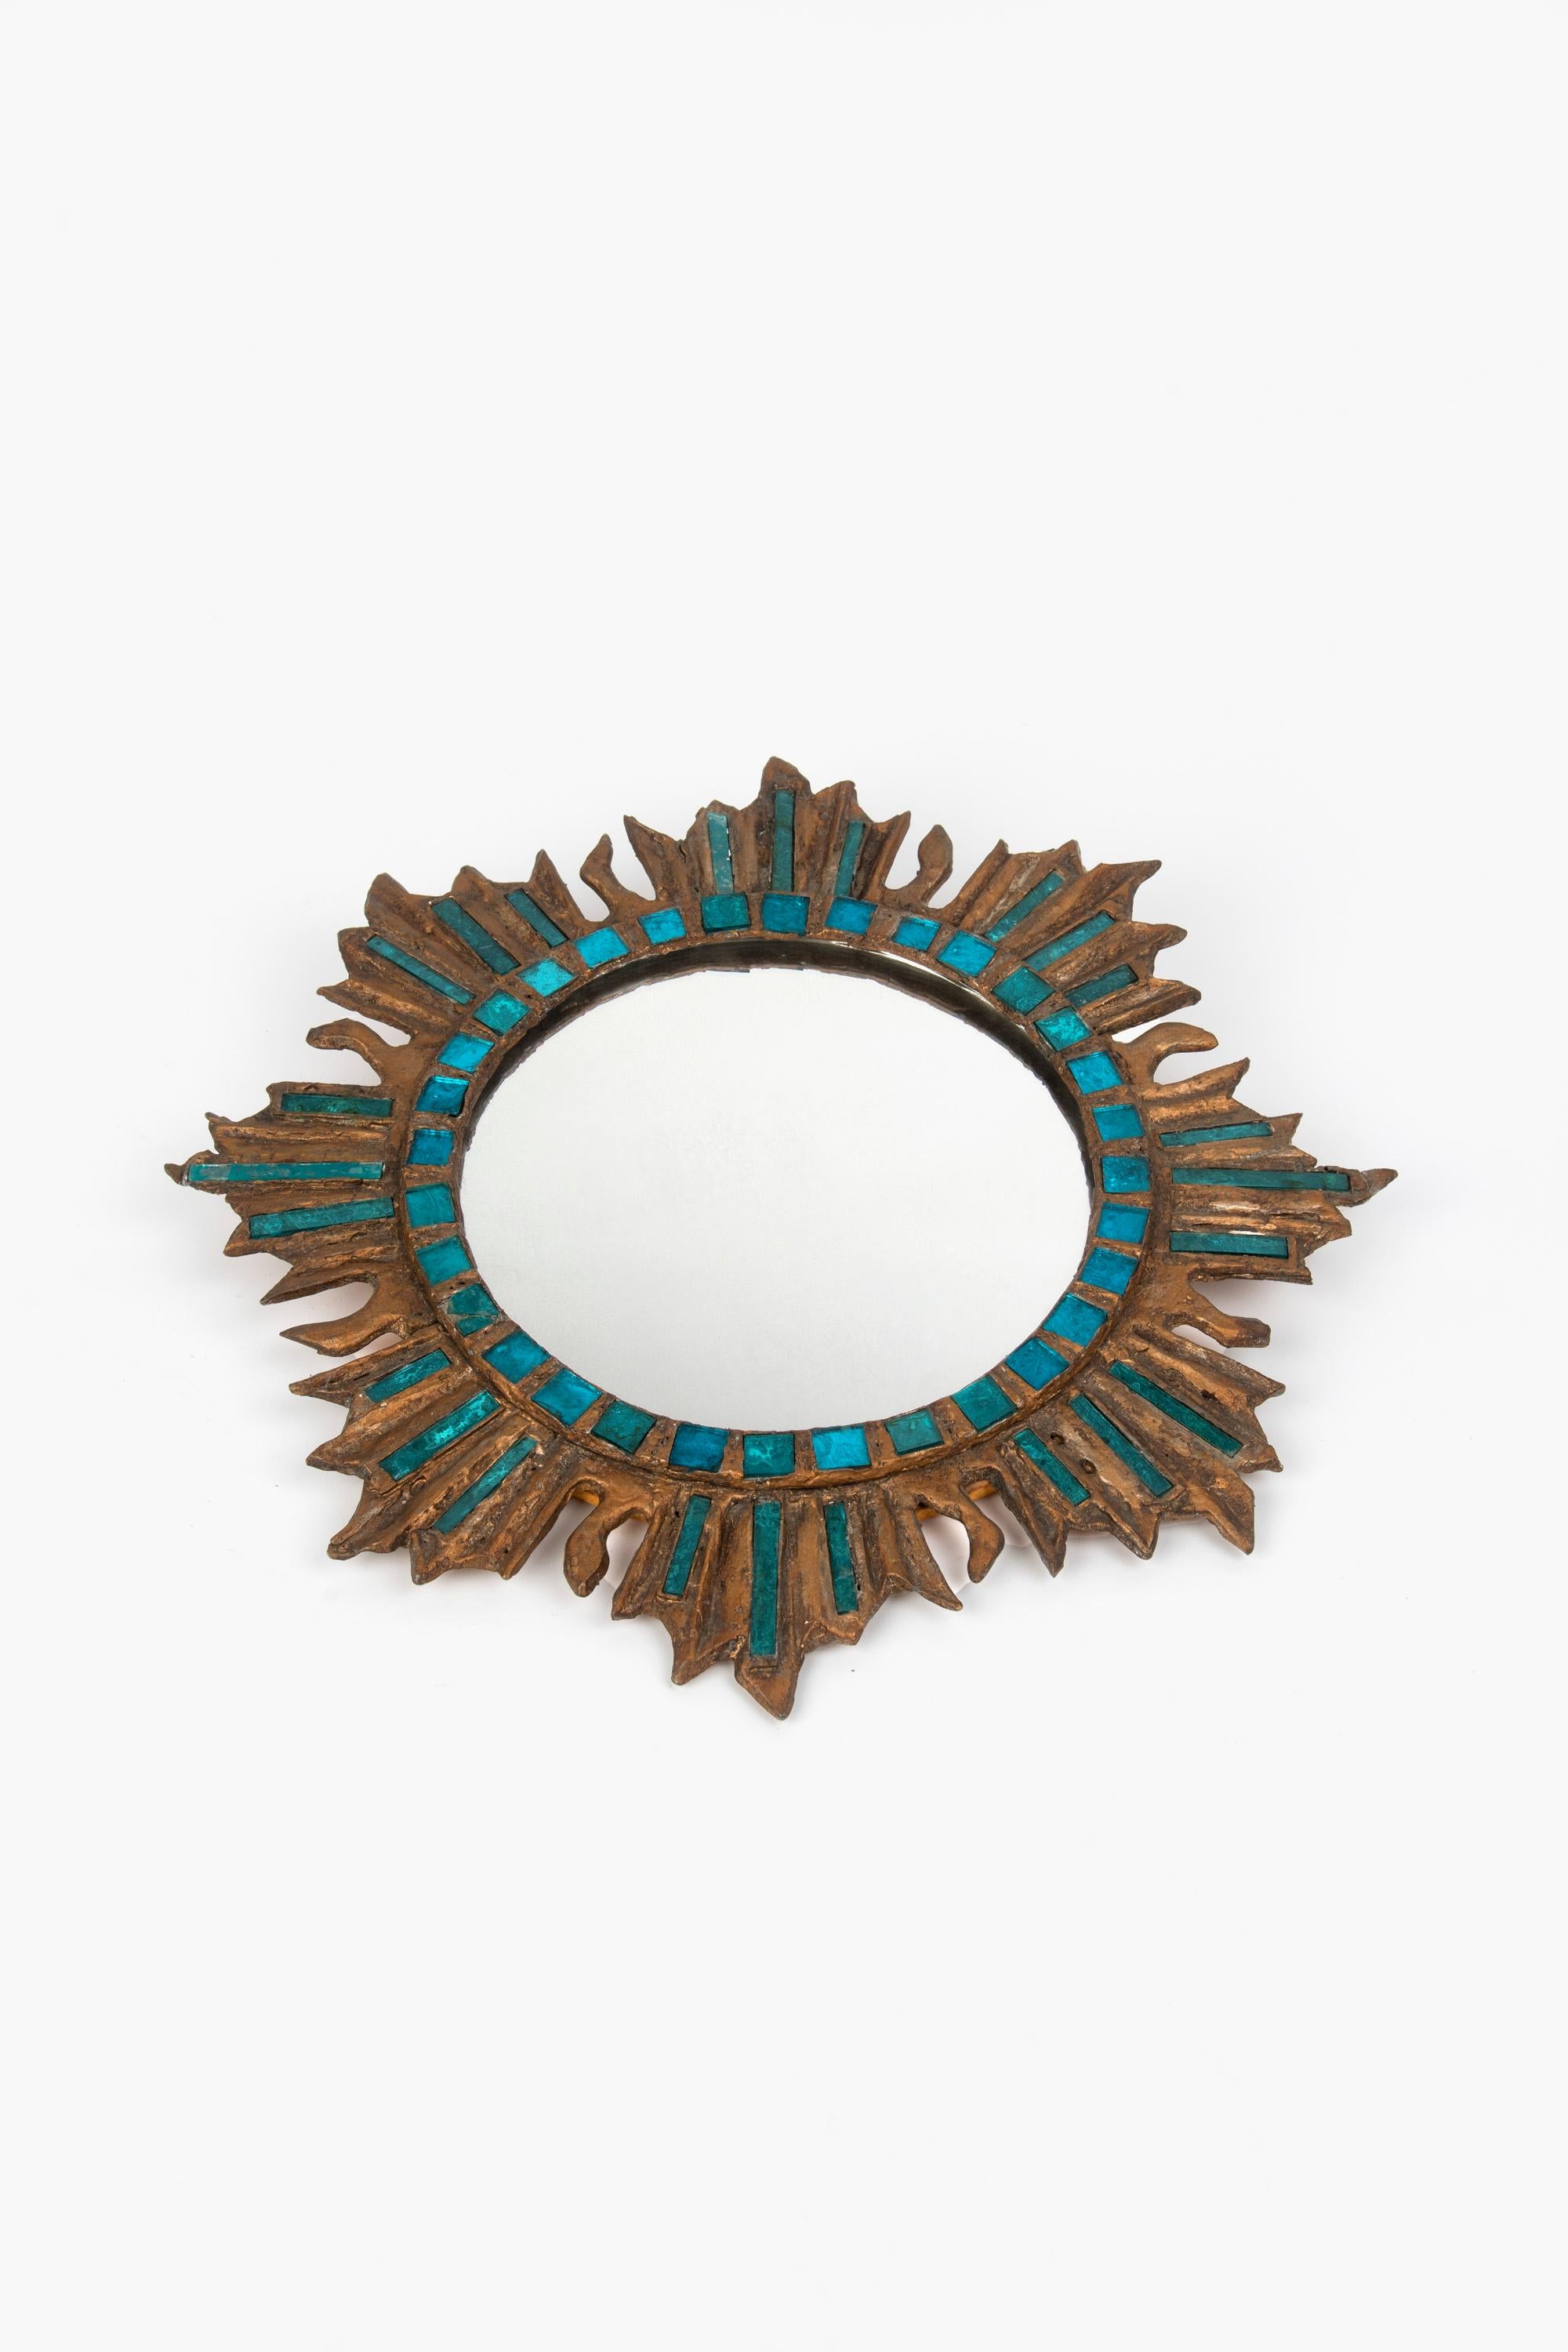 Painted Sunburst Mirror in the Style of Line Vautrin, 1960s For Sale